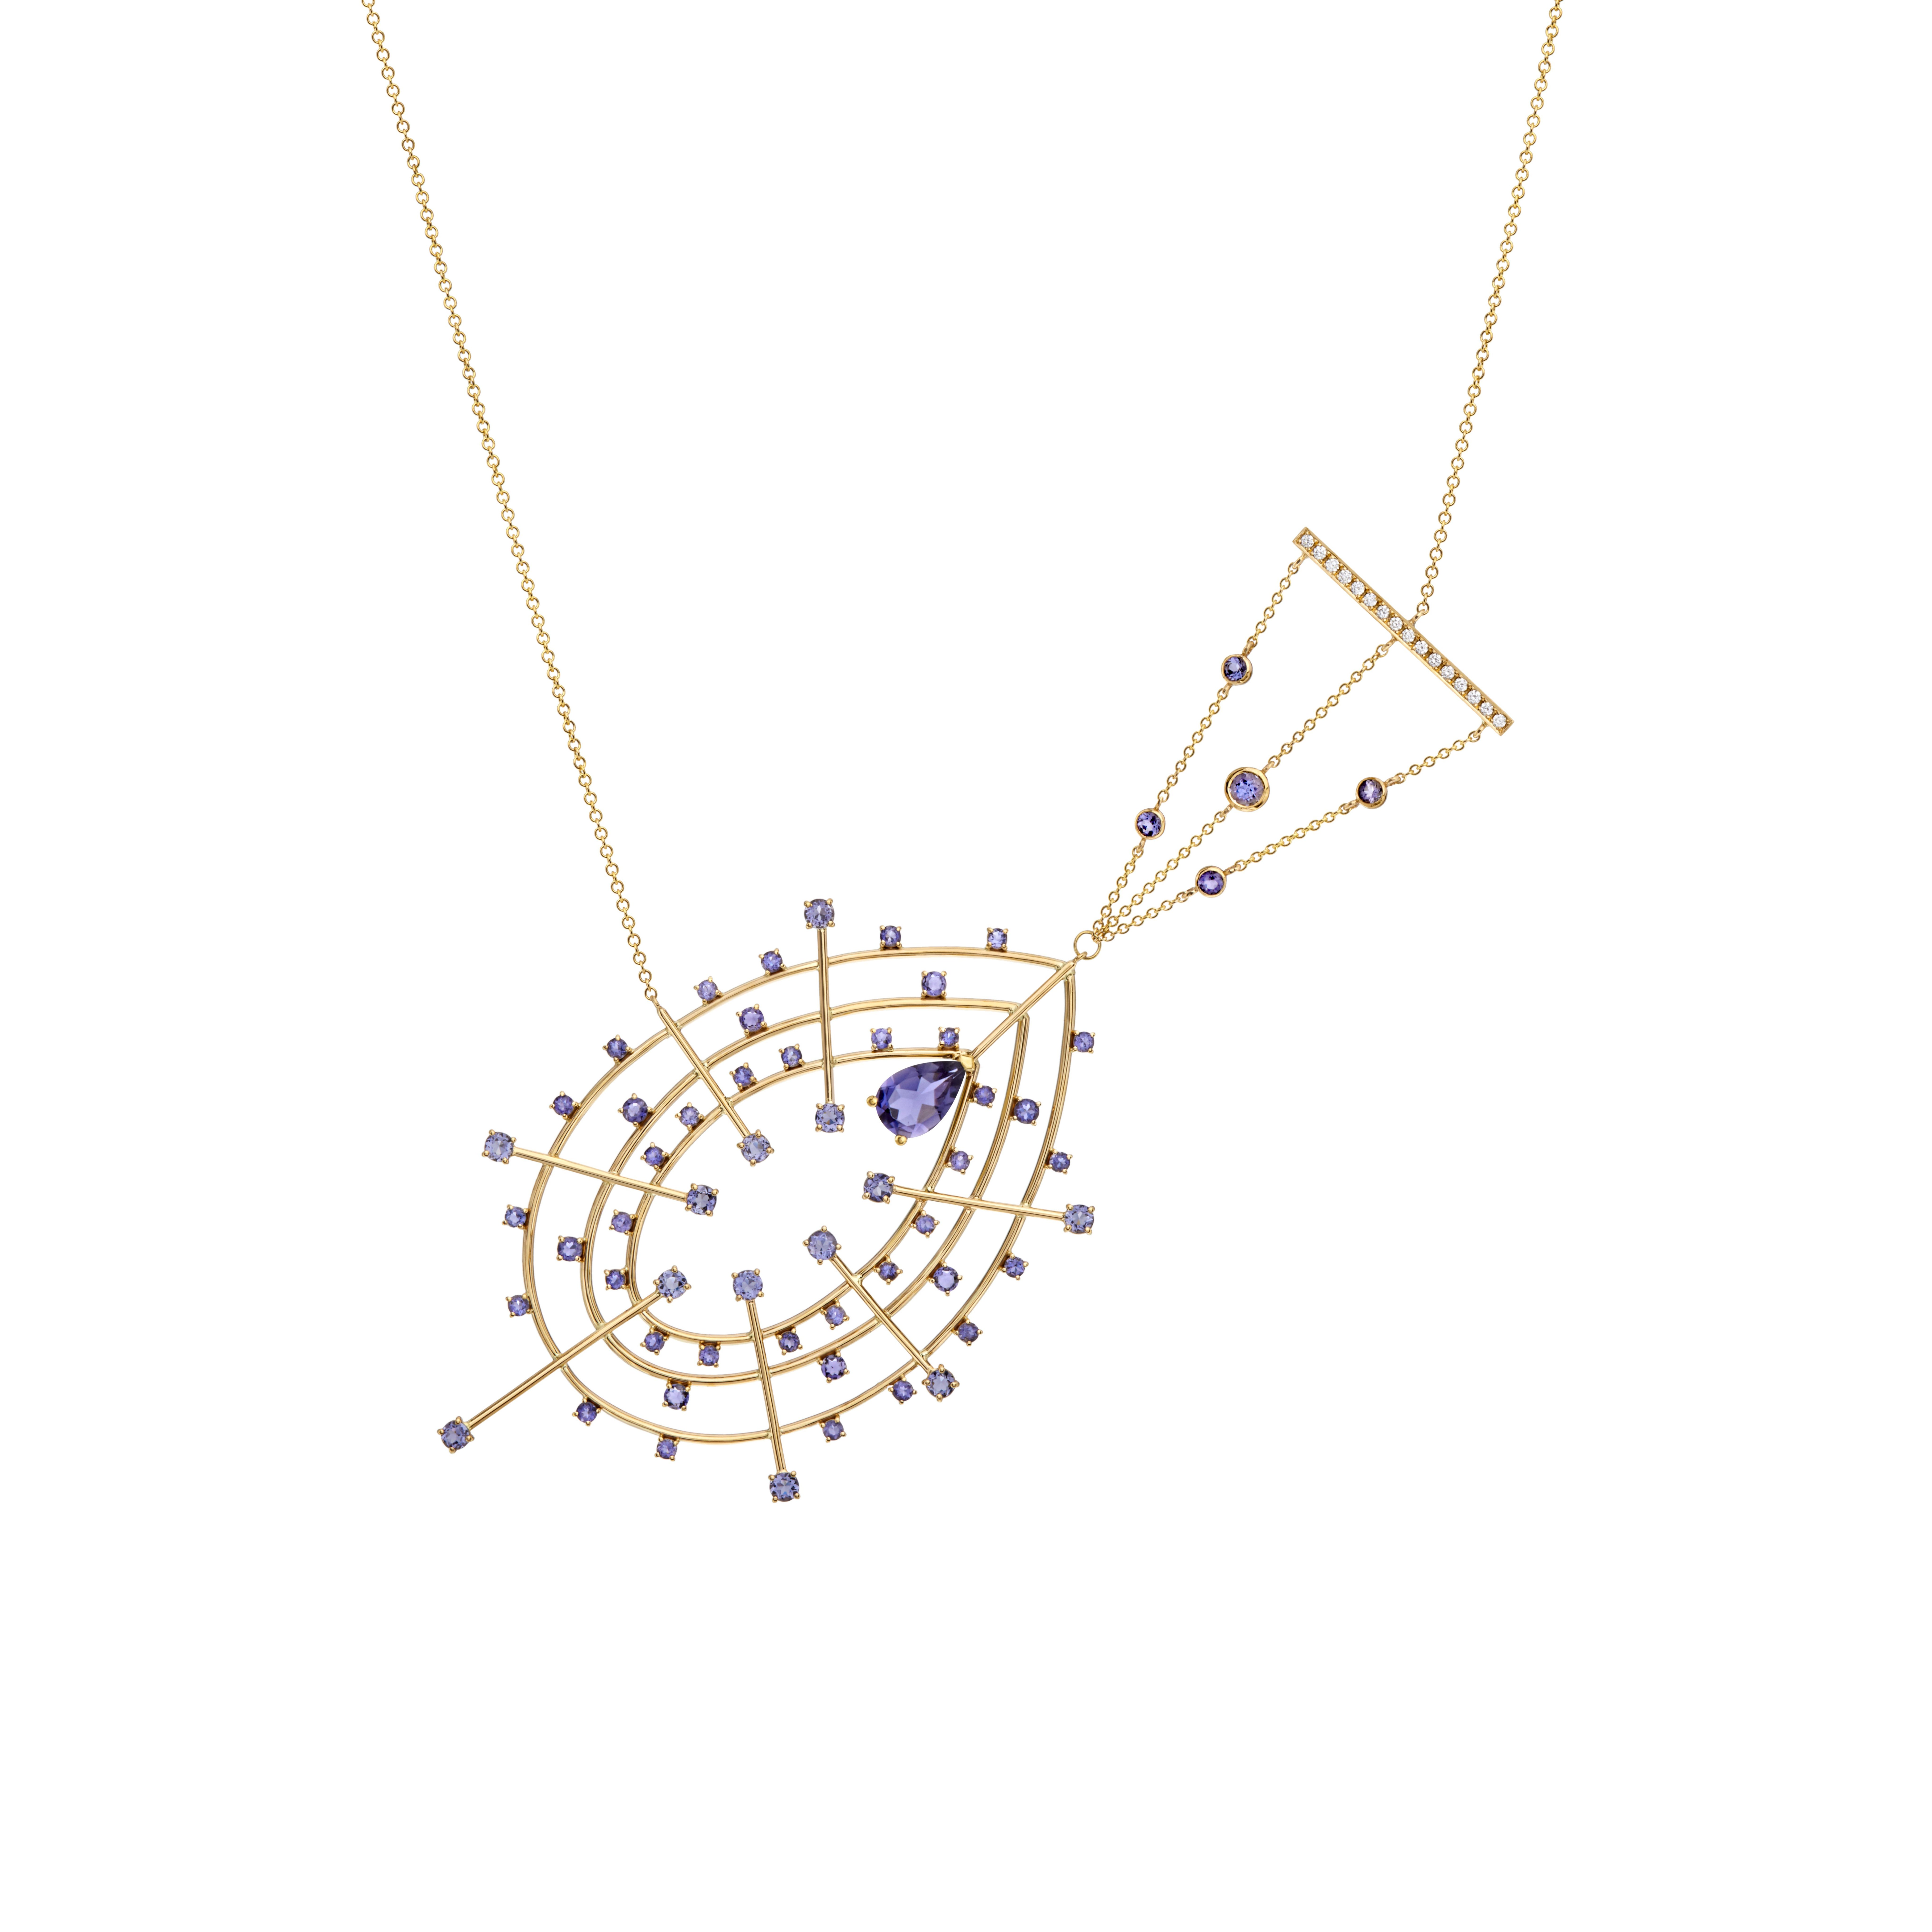 Pear Radial Shaped Necklace in 18Kt Yellow Gold with Iolites and Diamonds Stones